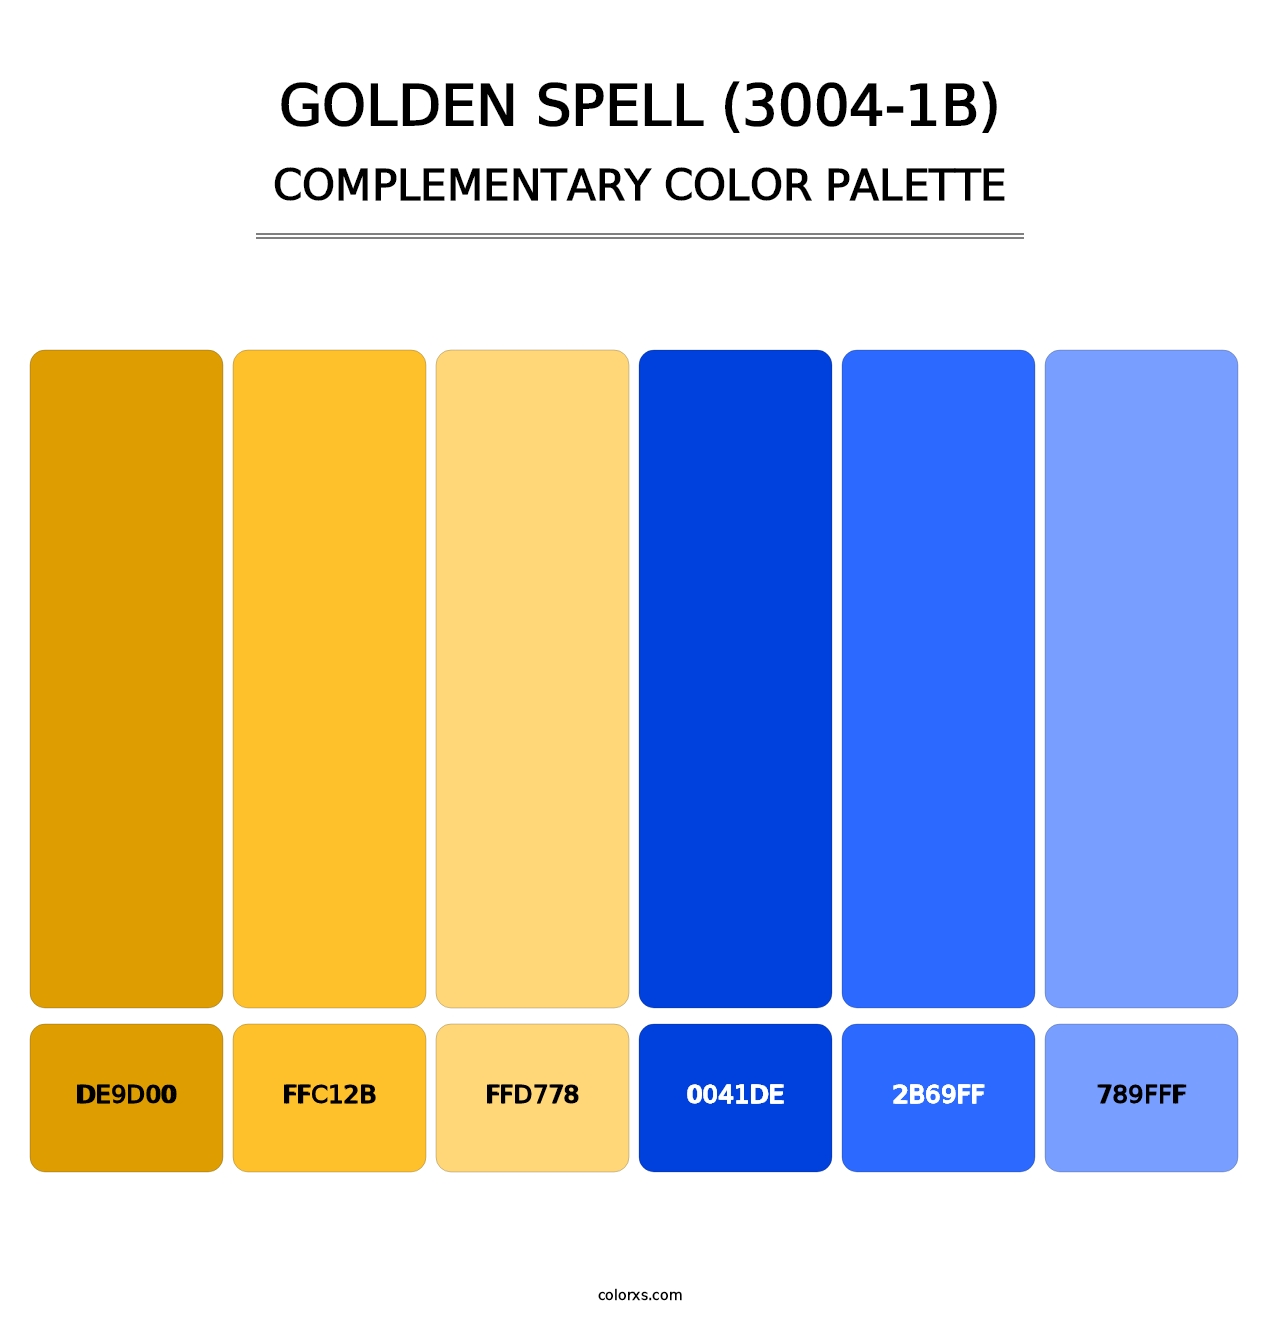 Golden Spell (3004-1B) - Complementary Color Palette